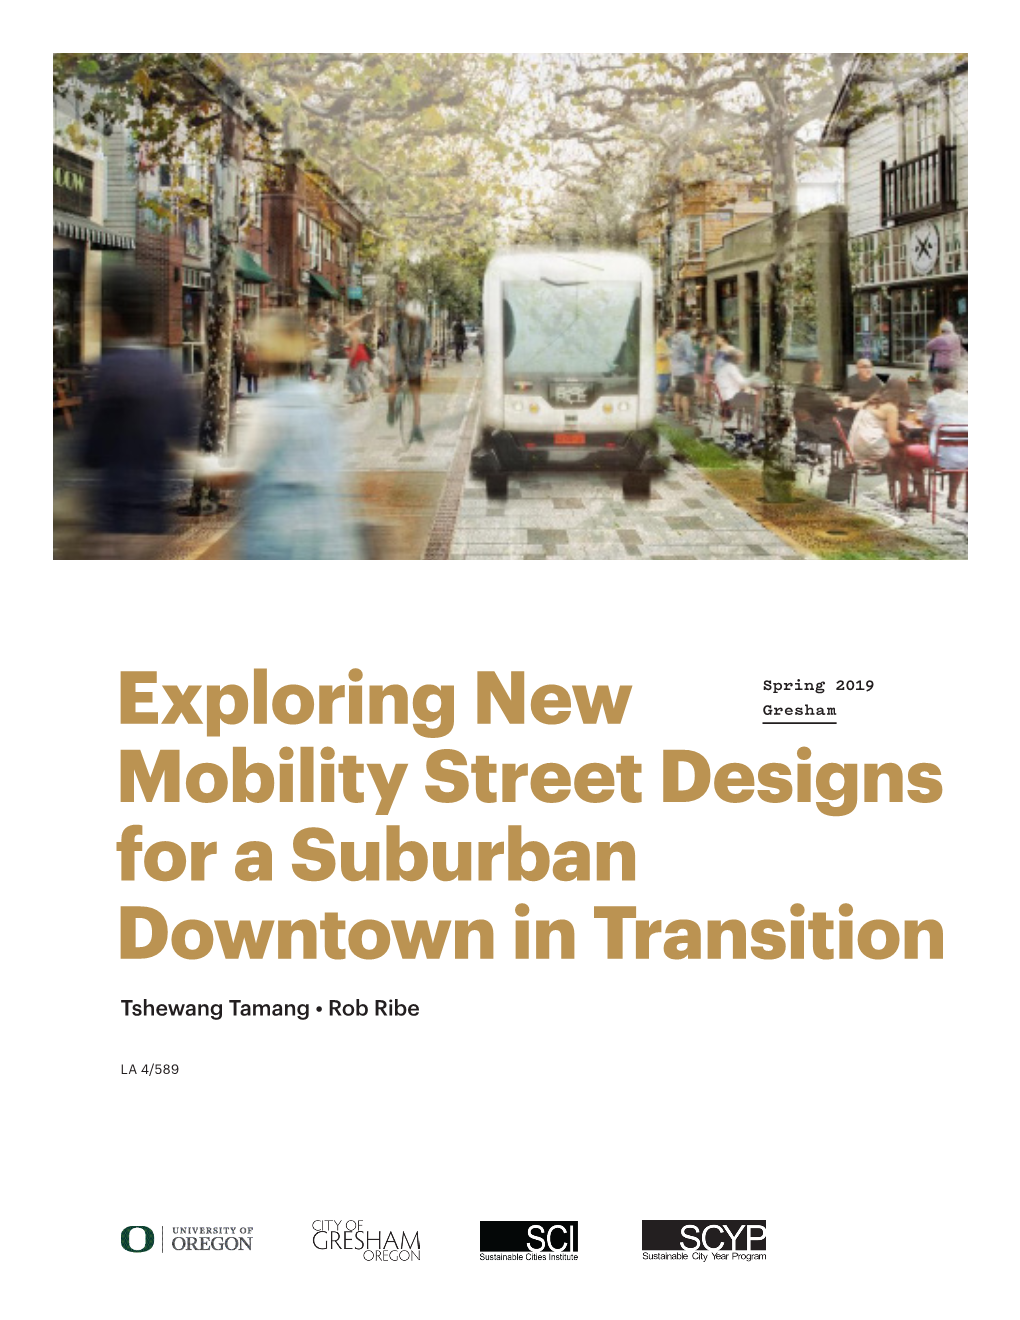 Exploring New Mobility Street Designs for a Suburban Downtown in Transition